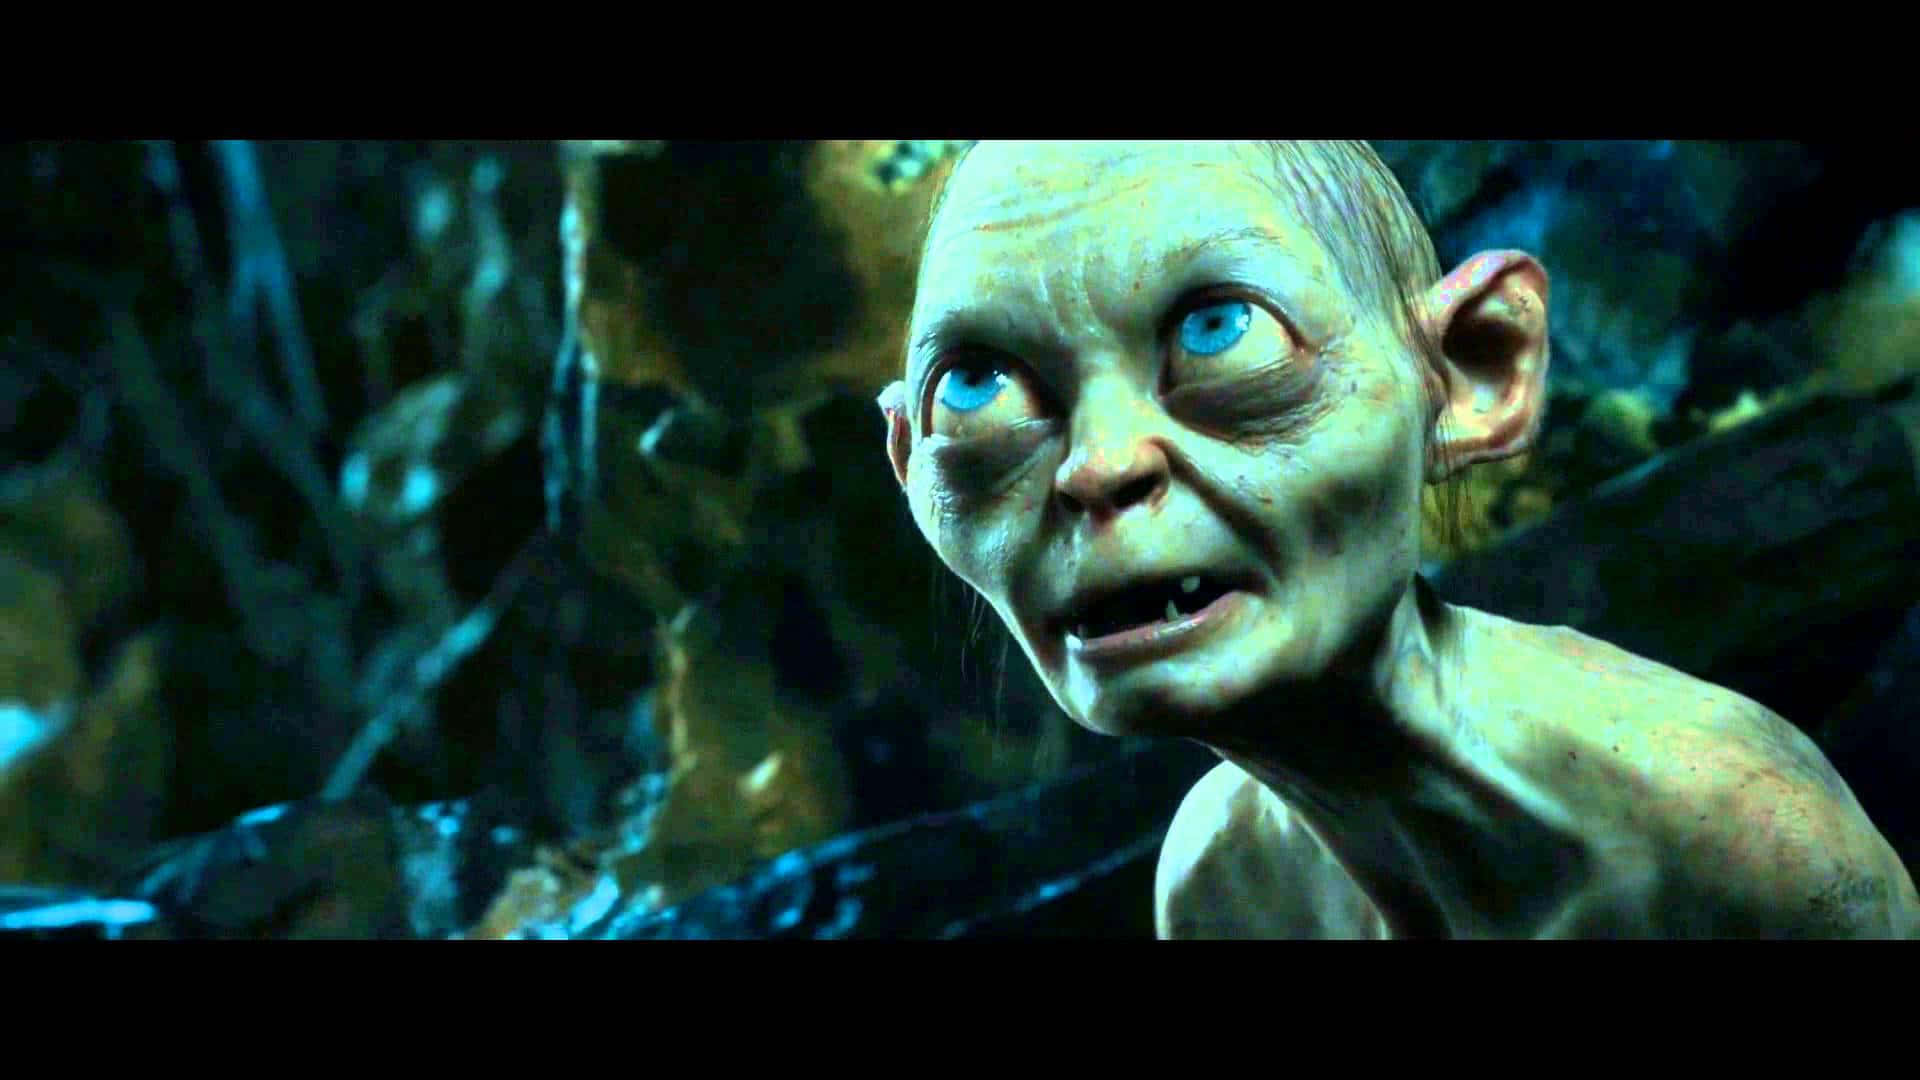 Gollum, a mysterious character of great power